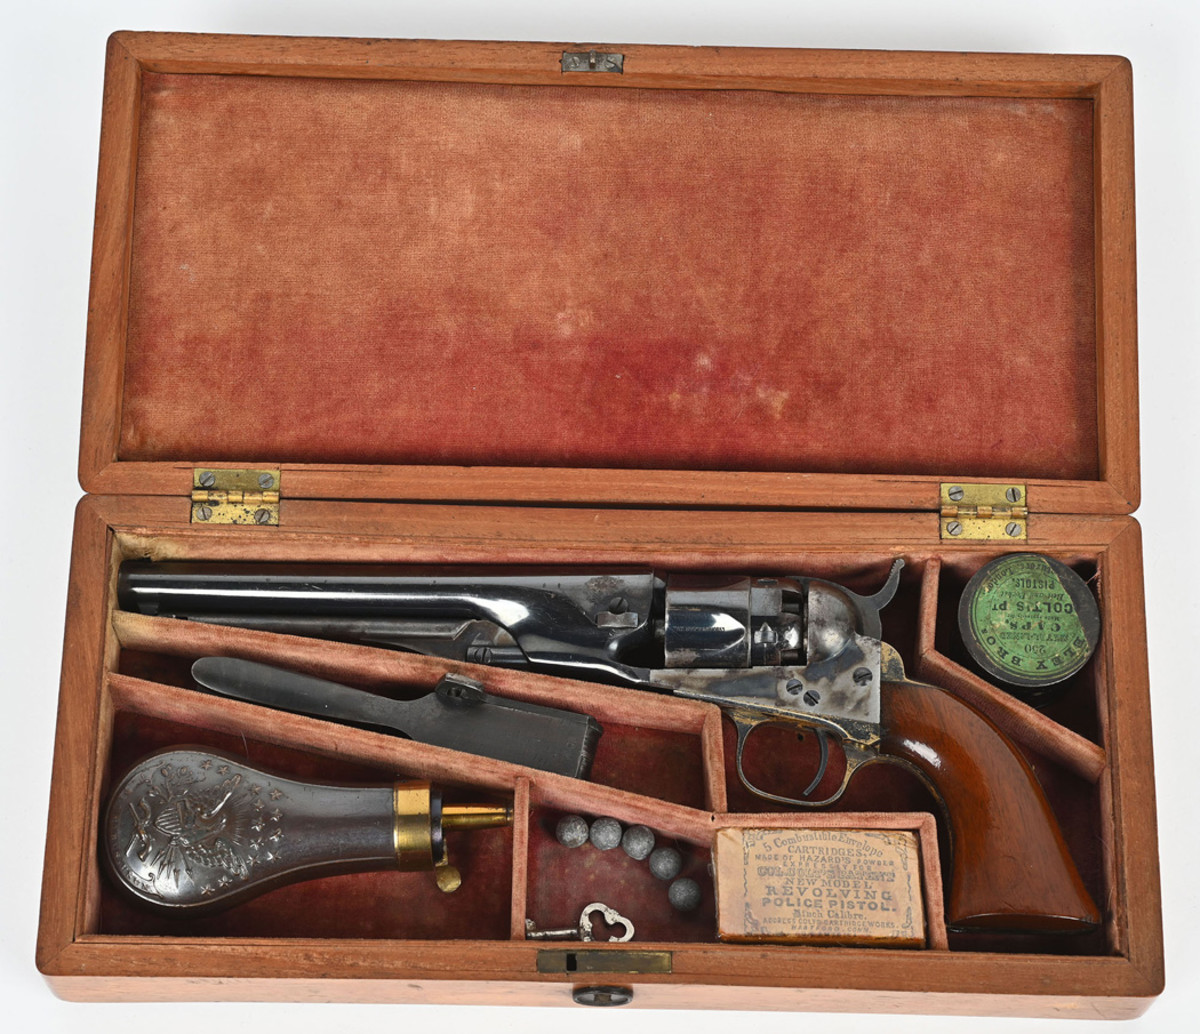 Colt Model 1862 Police Revolver, manufactured 1862, 6½in barrel, caliber .36 percussion. One of fewer than 29,000 produced. Original compartmented, velvet-lined case with pocket-size mechanical flask, iron 2-cavity mold, and rare ‘POLICE MODEL’ marked cartridge packet with correct 250-count Eley Bros. cap tin.